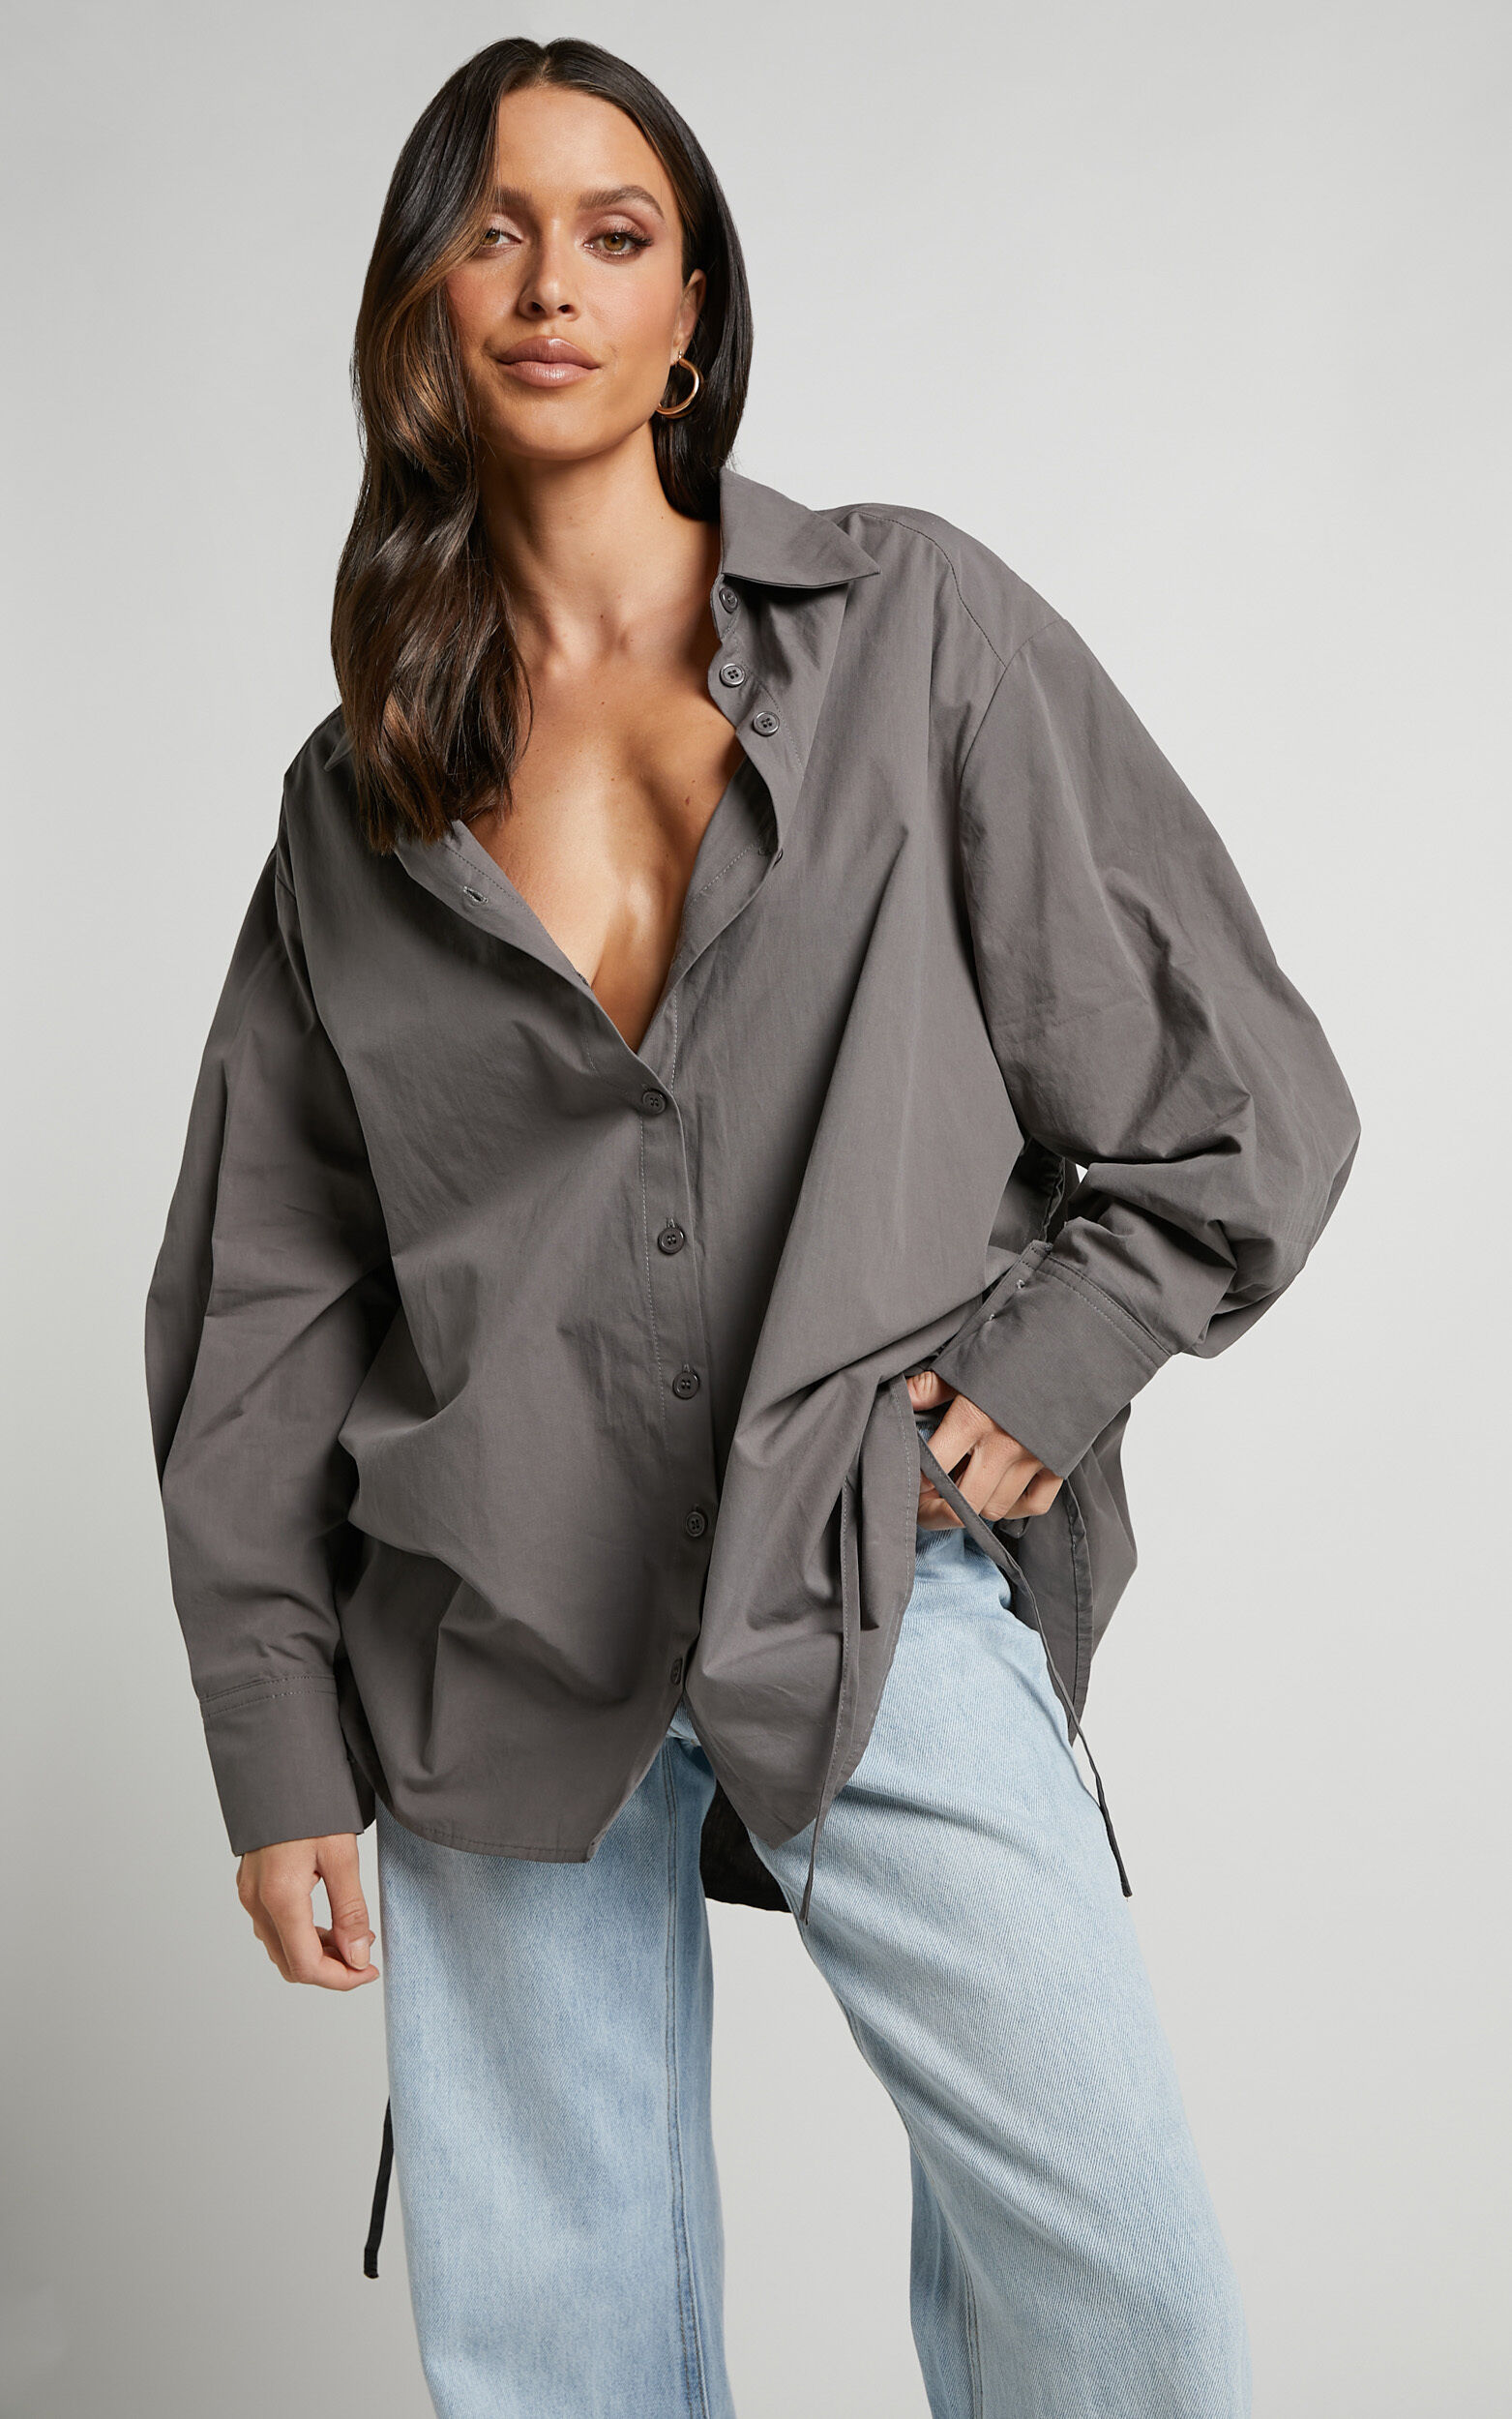 Kalpena Shirt - Ruched Side Oversized Shirt in Charcoal - 04, GRY1